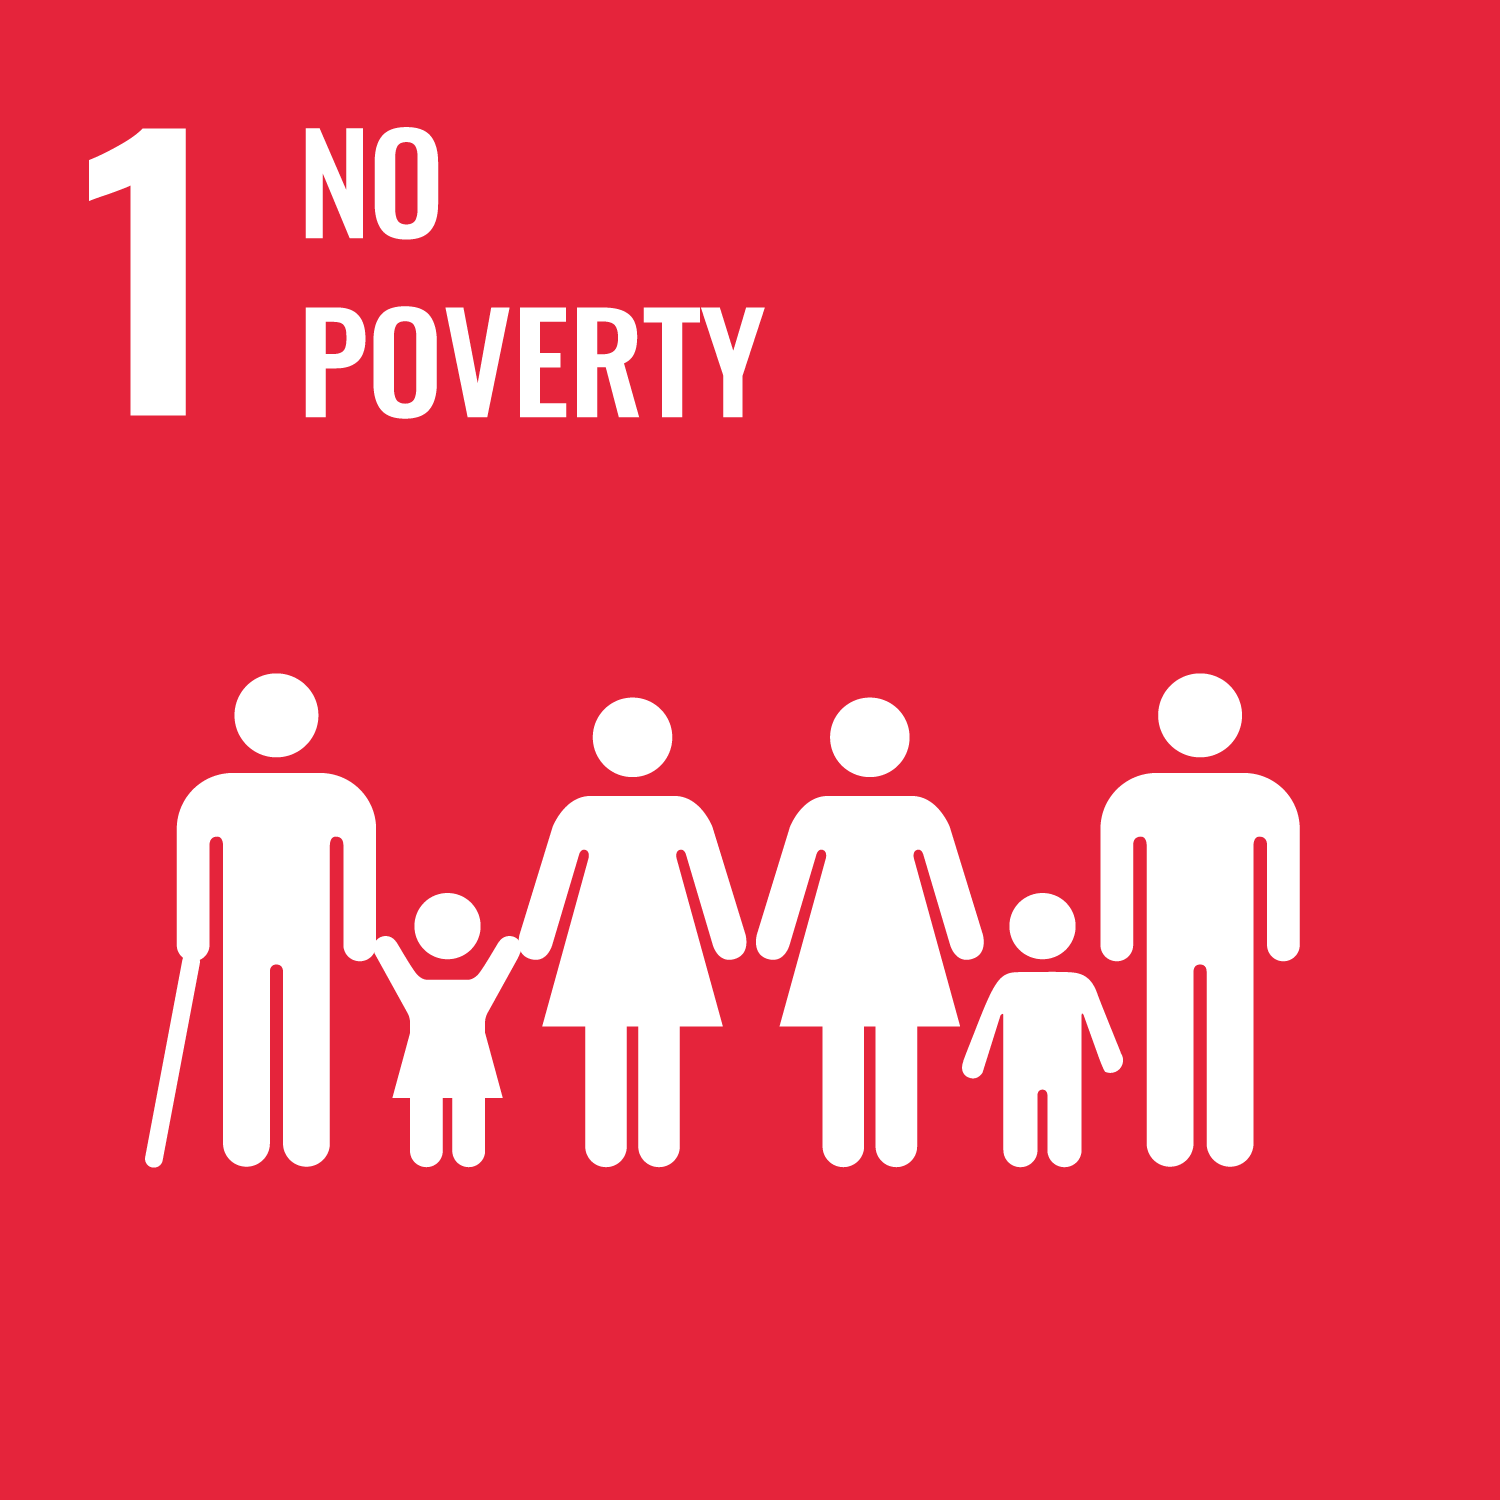 United Nation's 17 Sustainable Development Goals goal number 1